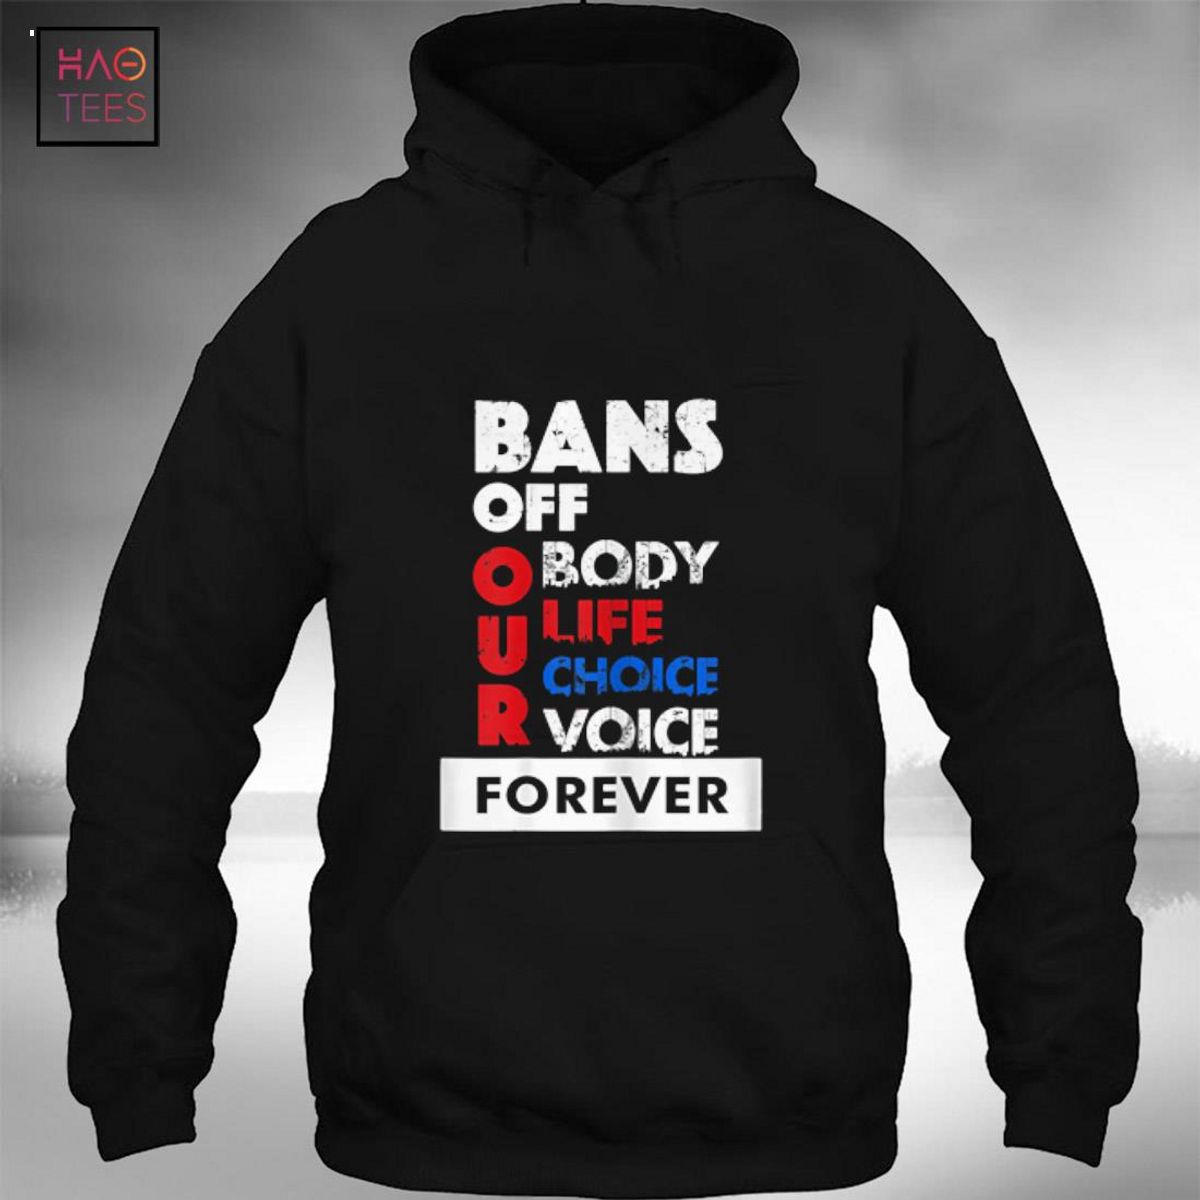 Womens Abortion Is Healthcare - Bans Off Our Bodies Shirt